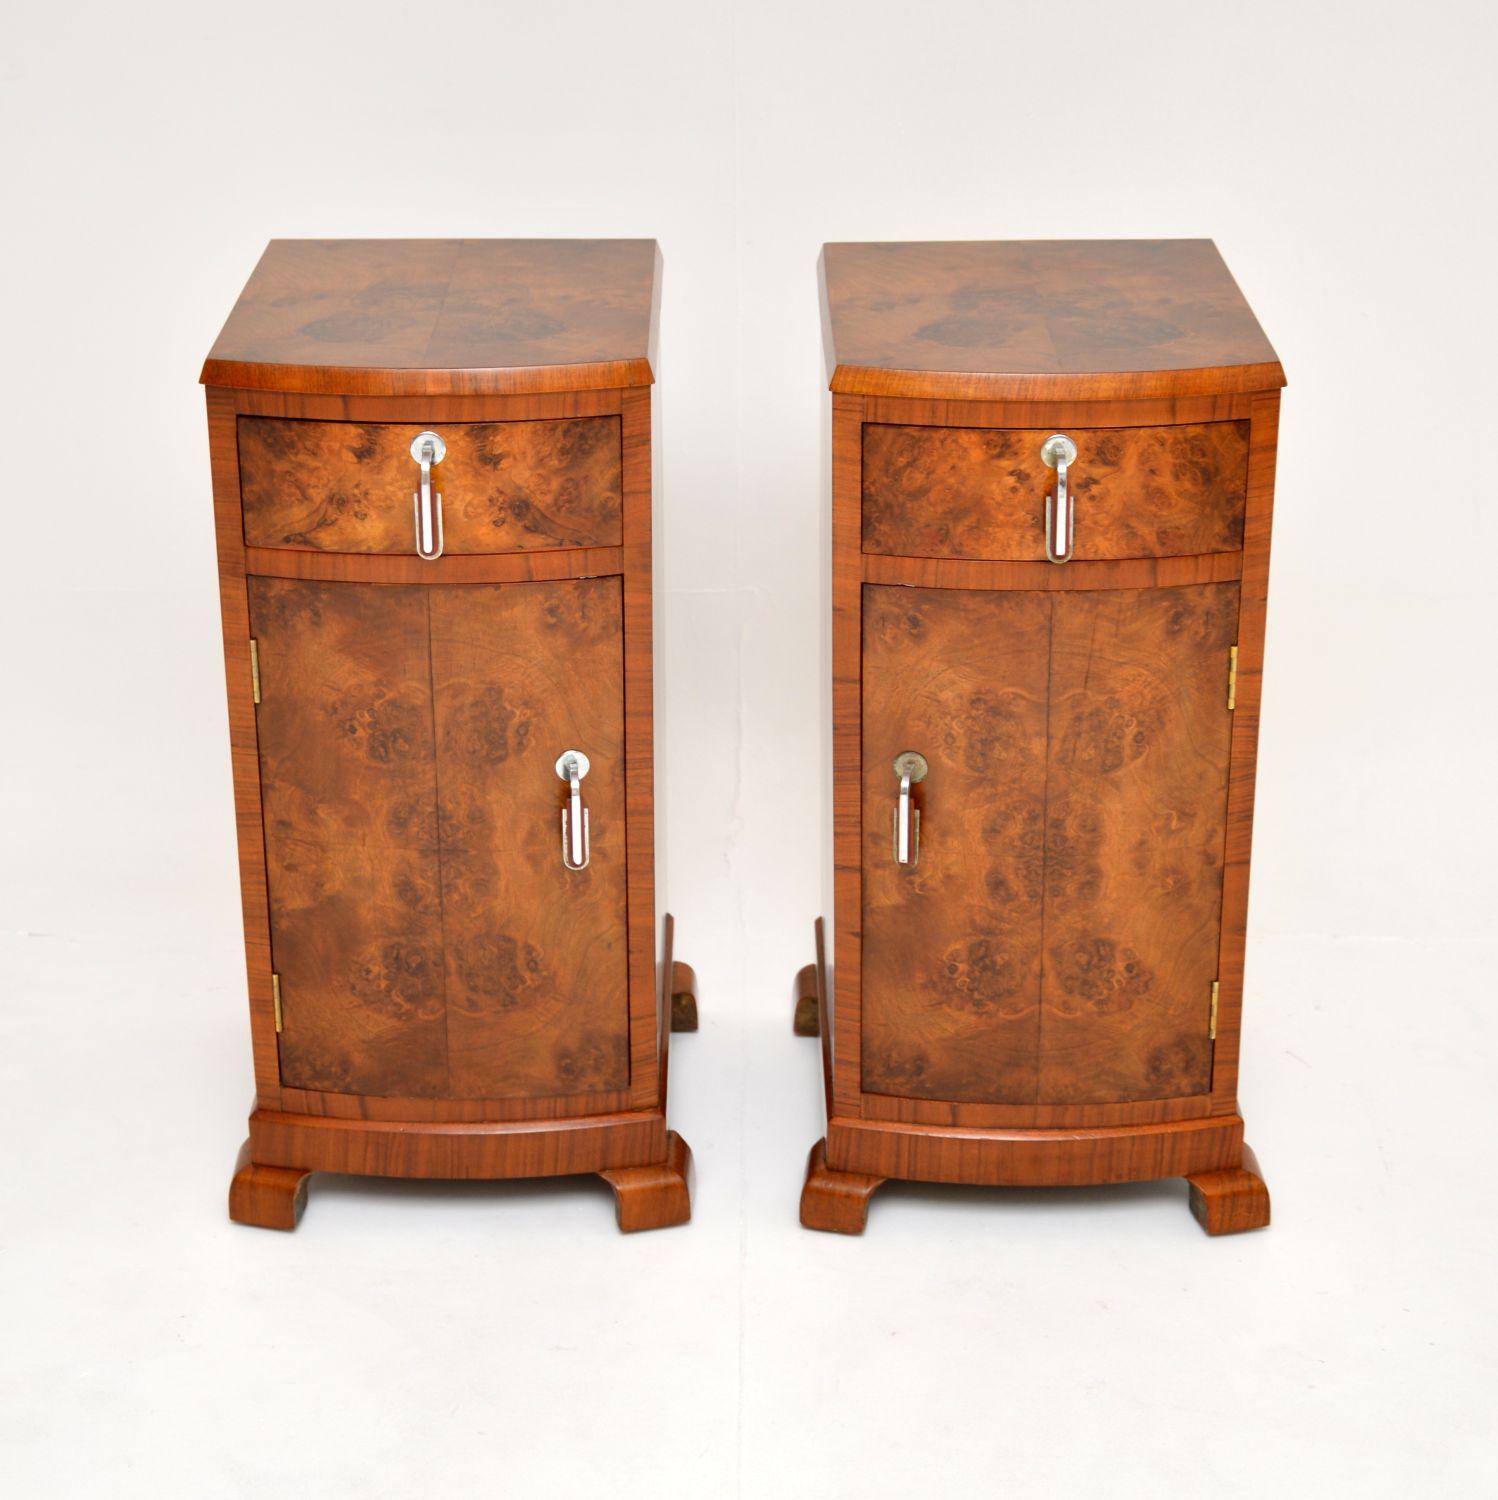 A fantastic pair of original Art Deco period bedside cabinets in walnut. They were made in England, they date from the 1920-30’s.

The quality is exceptional, they have a bow fronted design, sit on lovely bracket feet and have lot of storage space